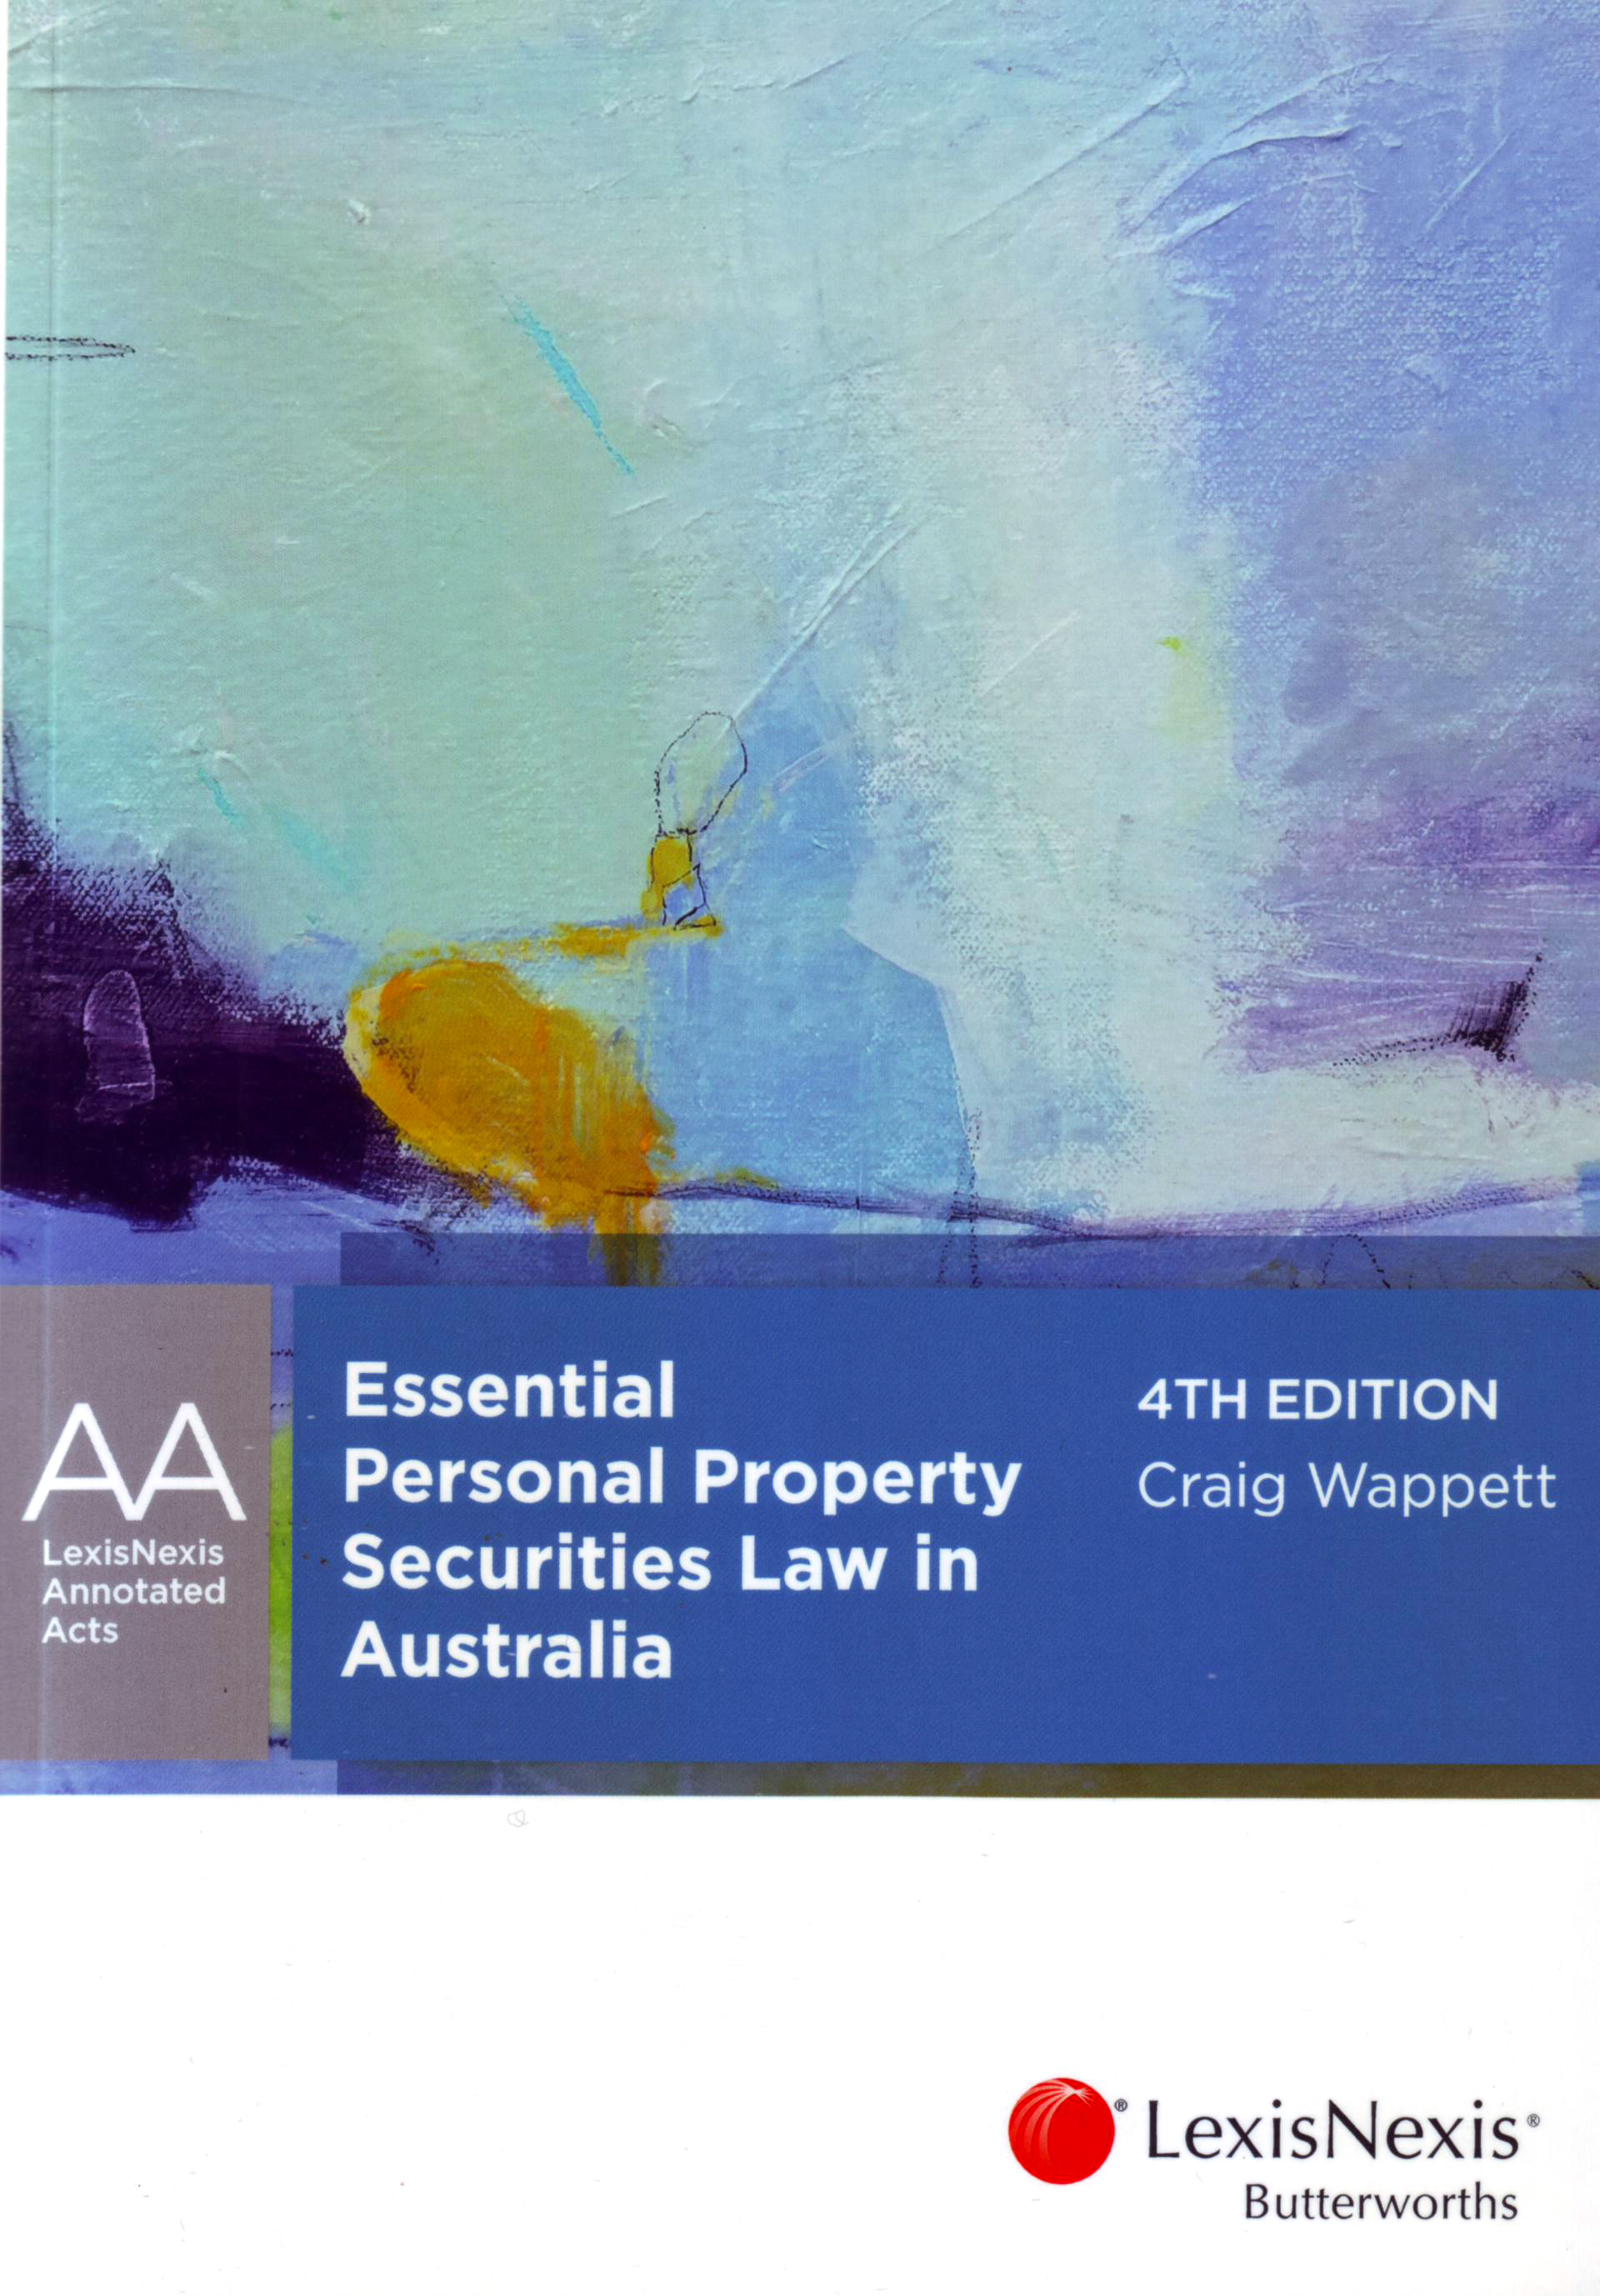 Essential Personal Property Securities Law in Australia e4